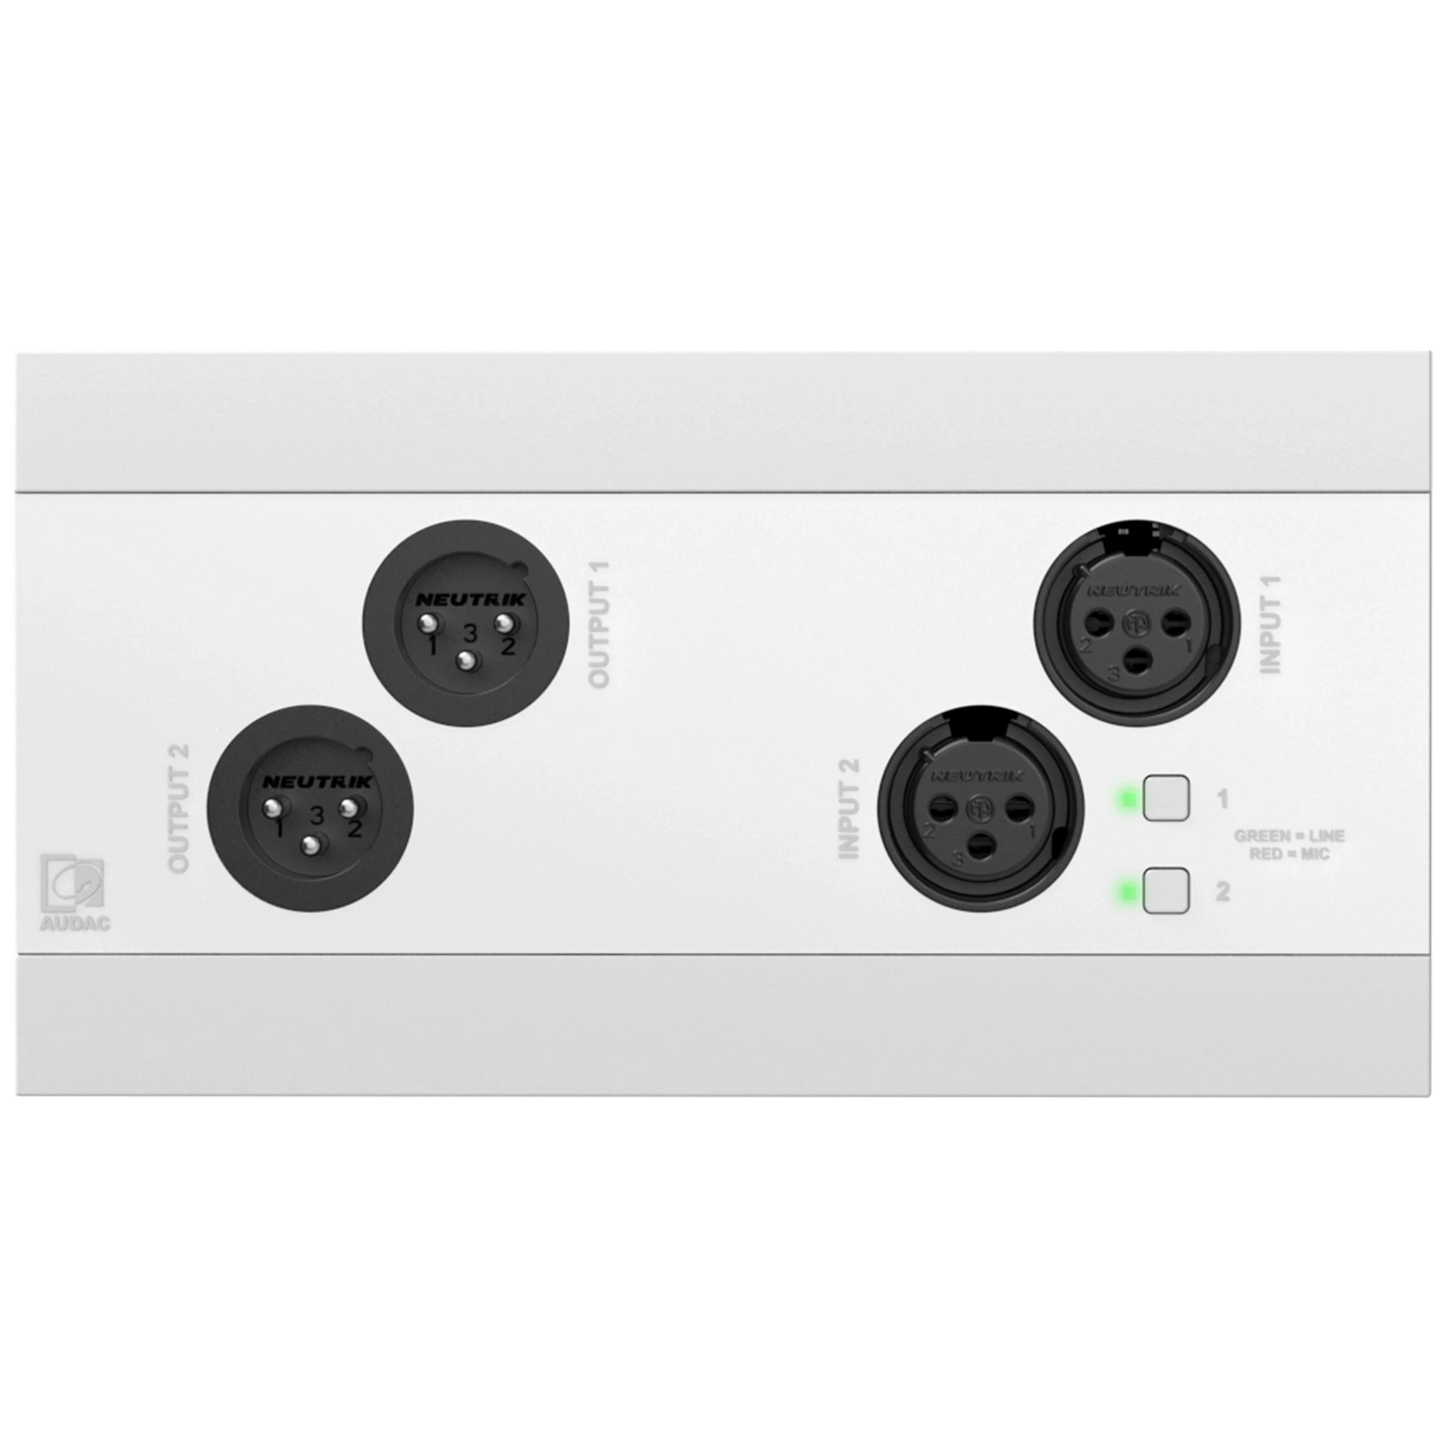 NWP222/W Network in- & output panel - 2 x XLR in- & out + BT (4 x 2 CH), White